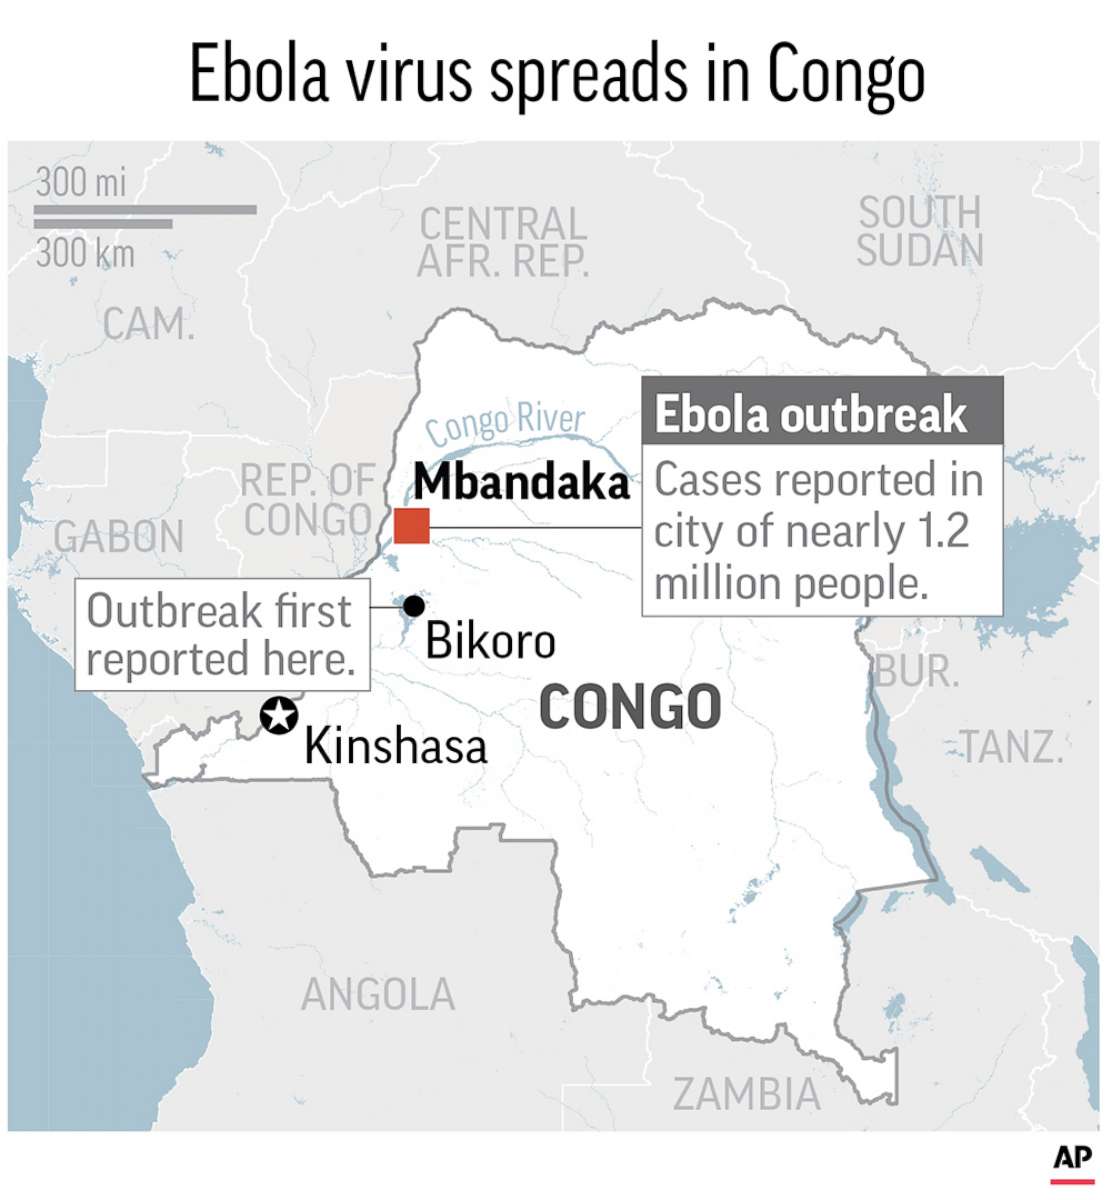 PHOTO: Mbandaka, Congo, where an ebola virus outbreak has been reported in the city of 1.2 million people, is pictured in this map.